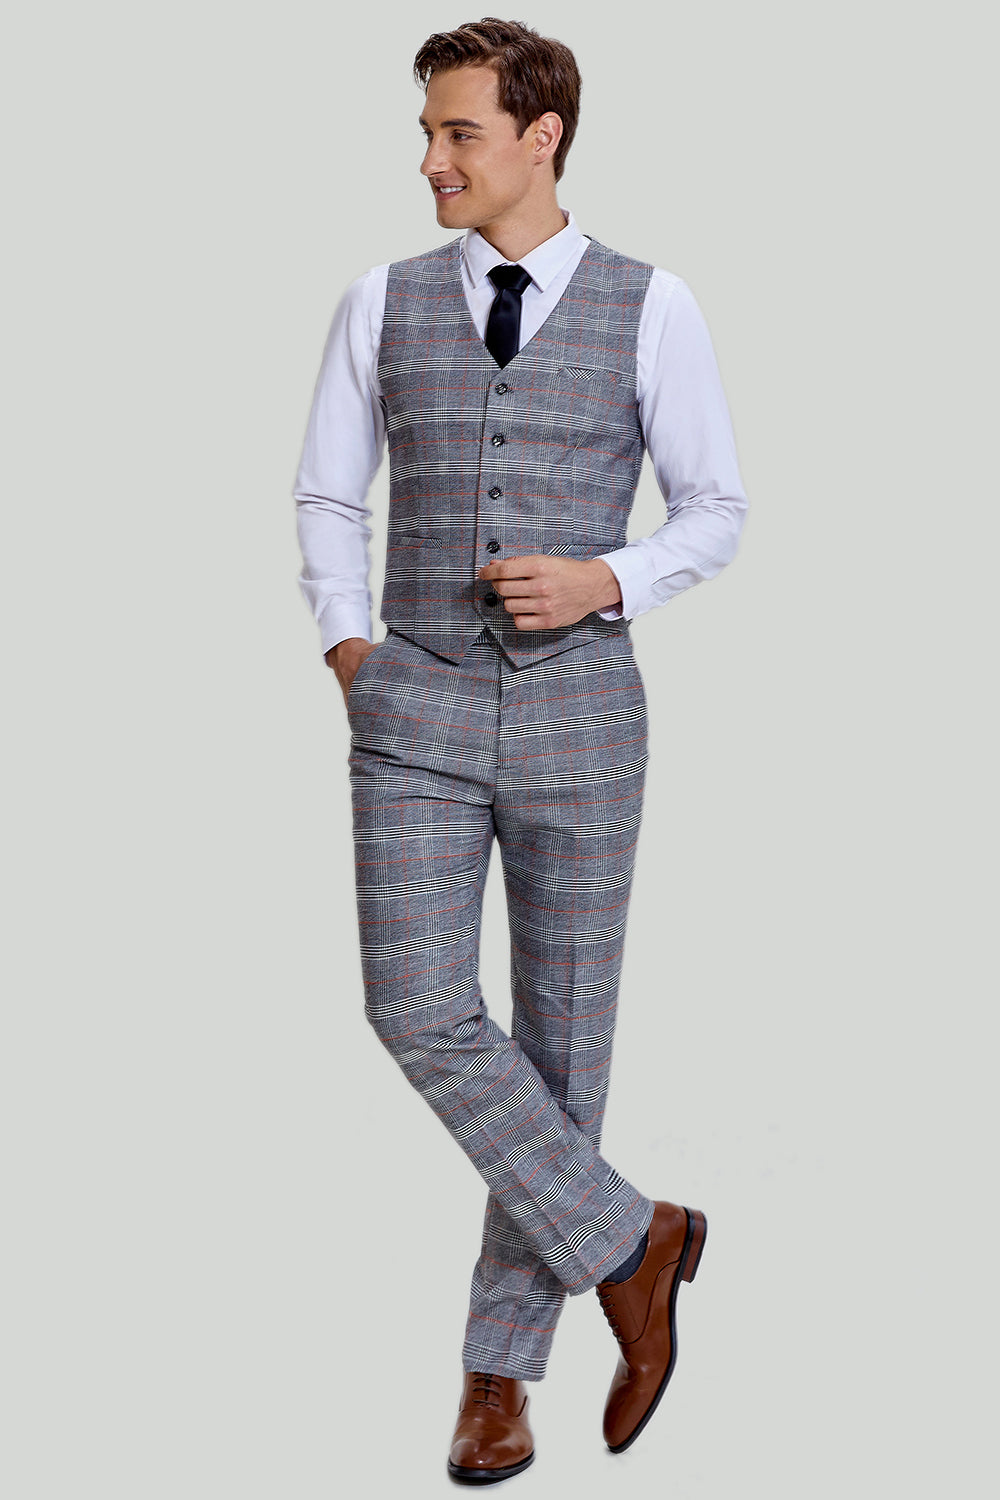 ZAPAKA Men's Homecoming Suits Grey Plaid Wide Peak Lapel 3 Piece Single  Breasted Prom Suits and Tuxedo